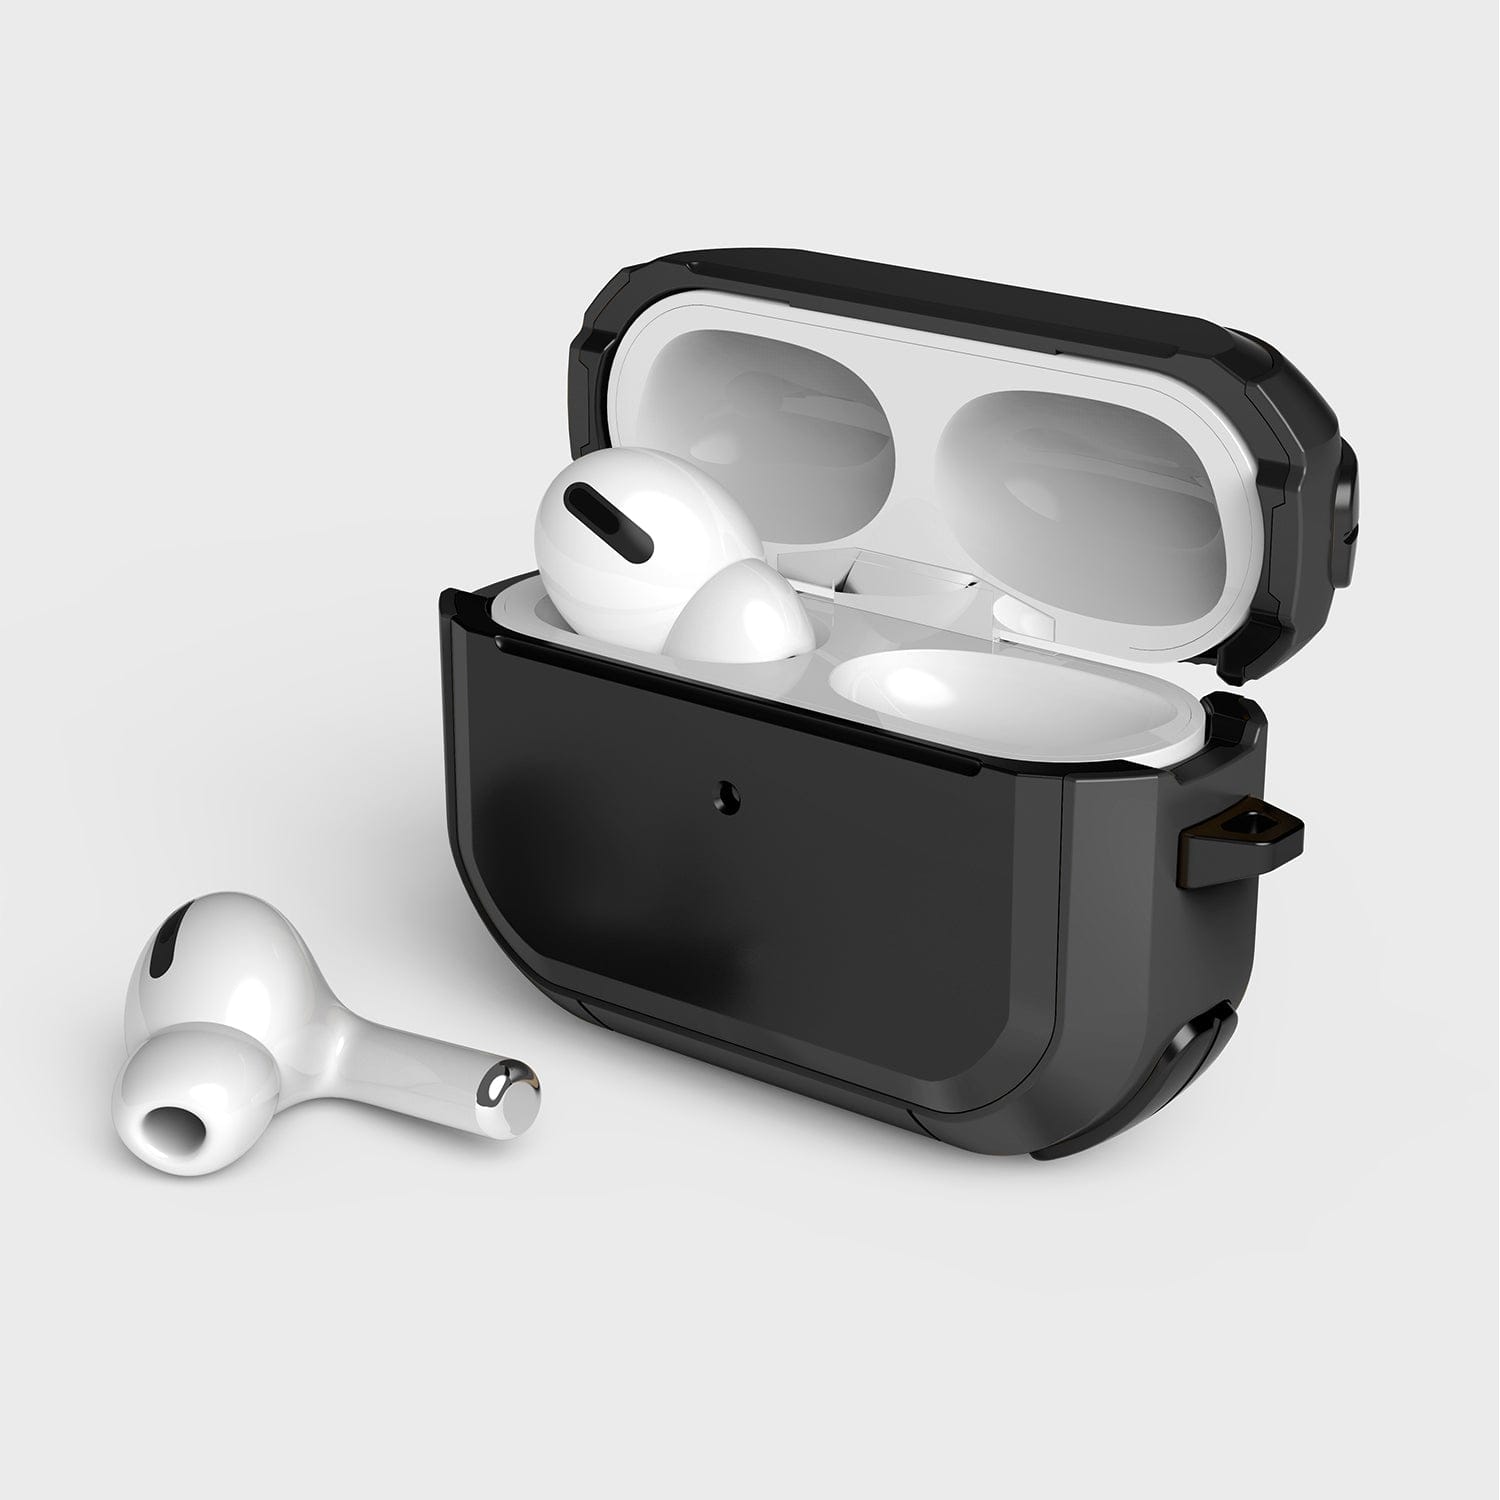 Armor Series Case for Apple AirPods Pro 2 (2nd Generation) - Black